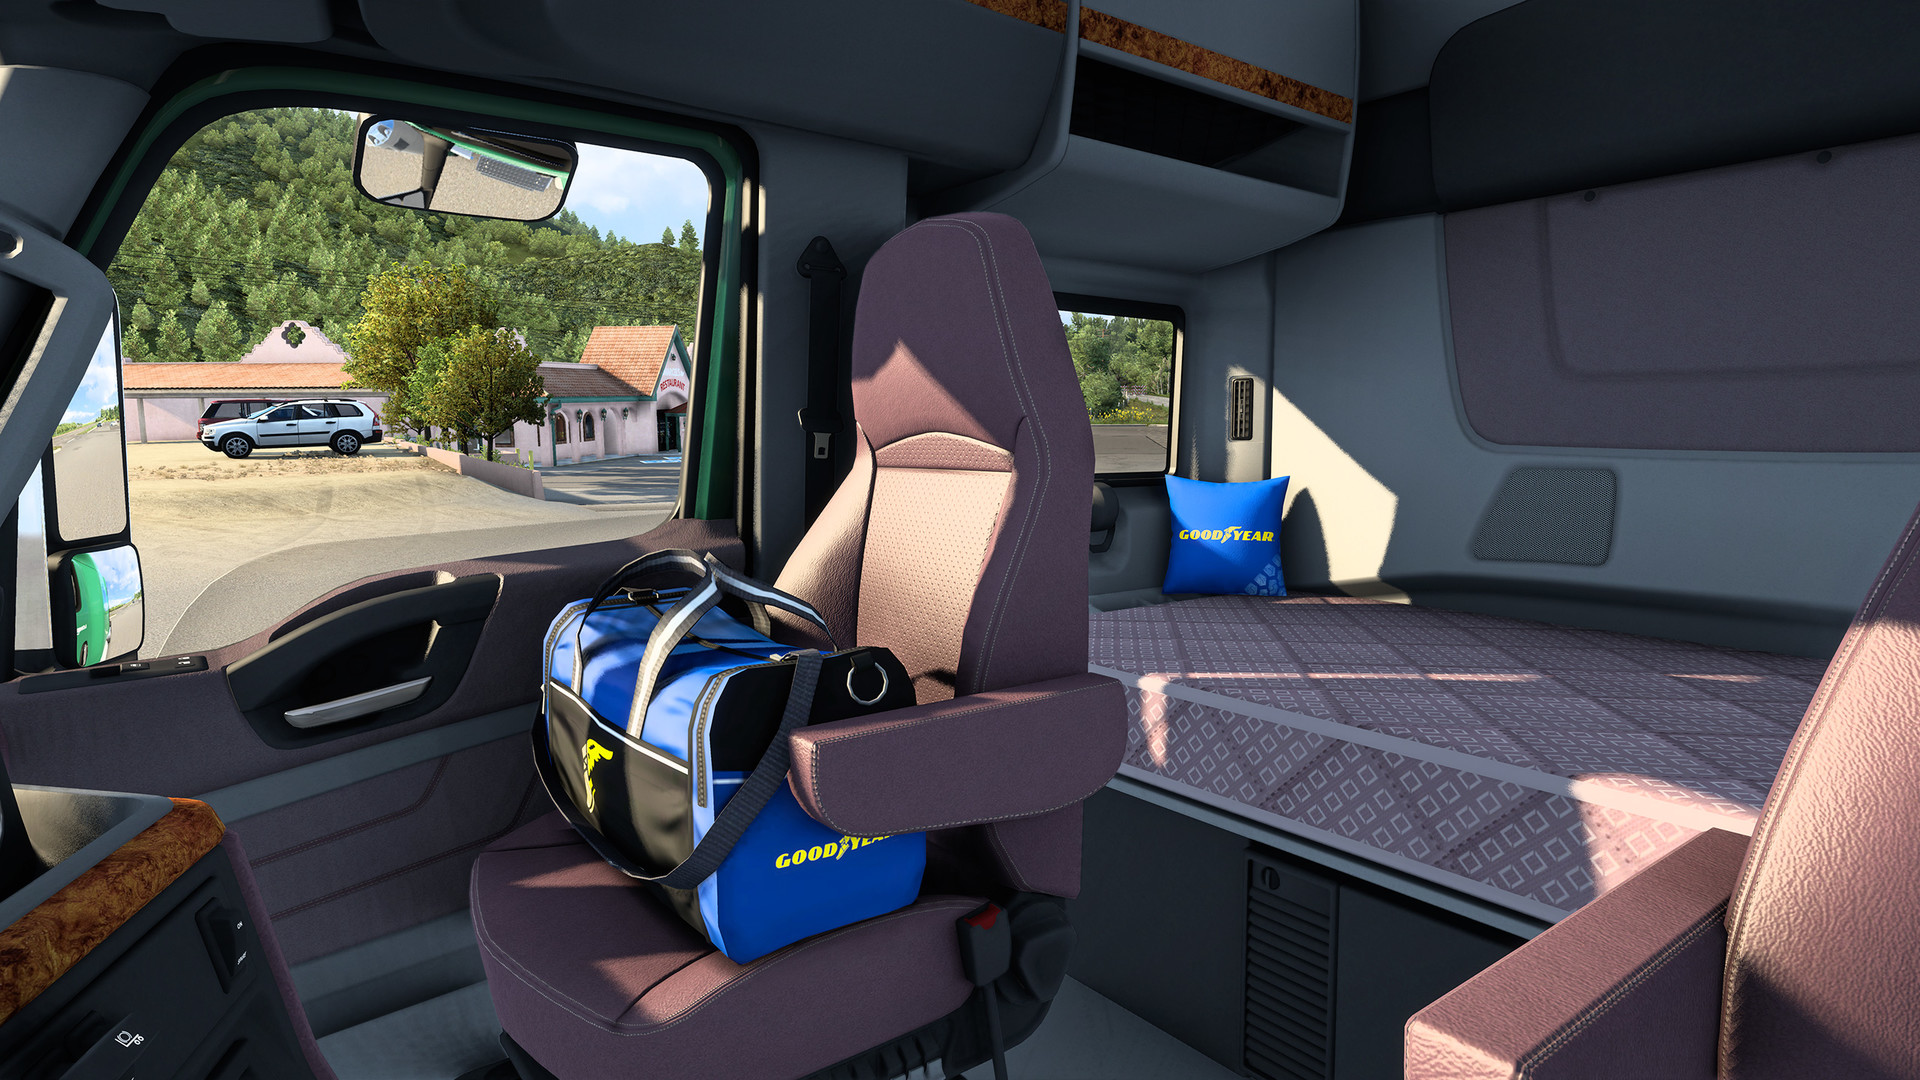 American Truck Simulator - Goodyear Tires Pack on Steam